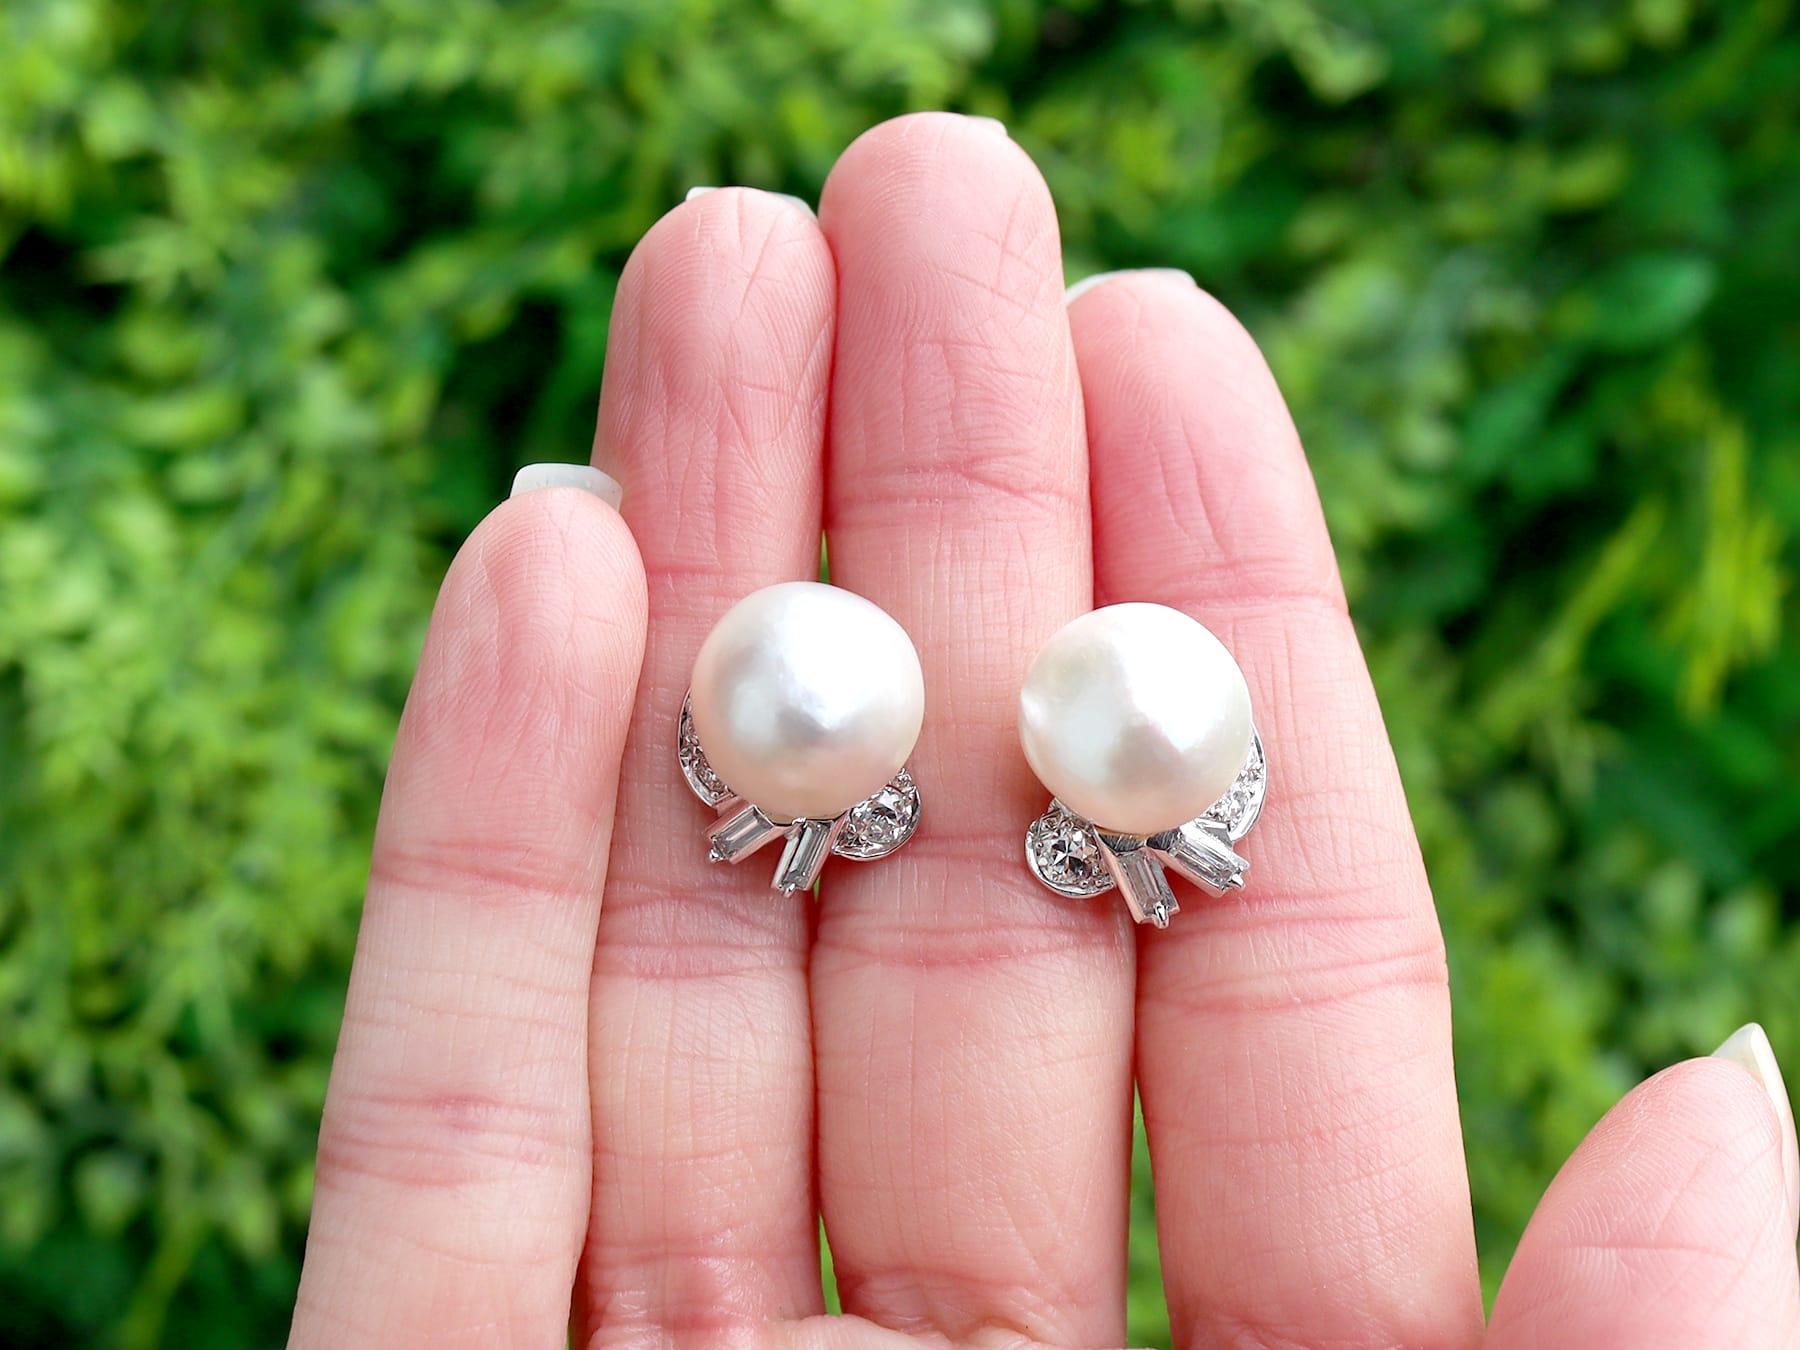 A fine and impressive pair of antique 1930s cultured pearl and 1.10 carat diamond, platinum earrings with 18 karat white gold screw back fastenings; part of our diverse vintage estate jewelry collections.

These fine and impressive antique pearl and